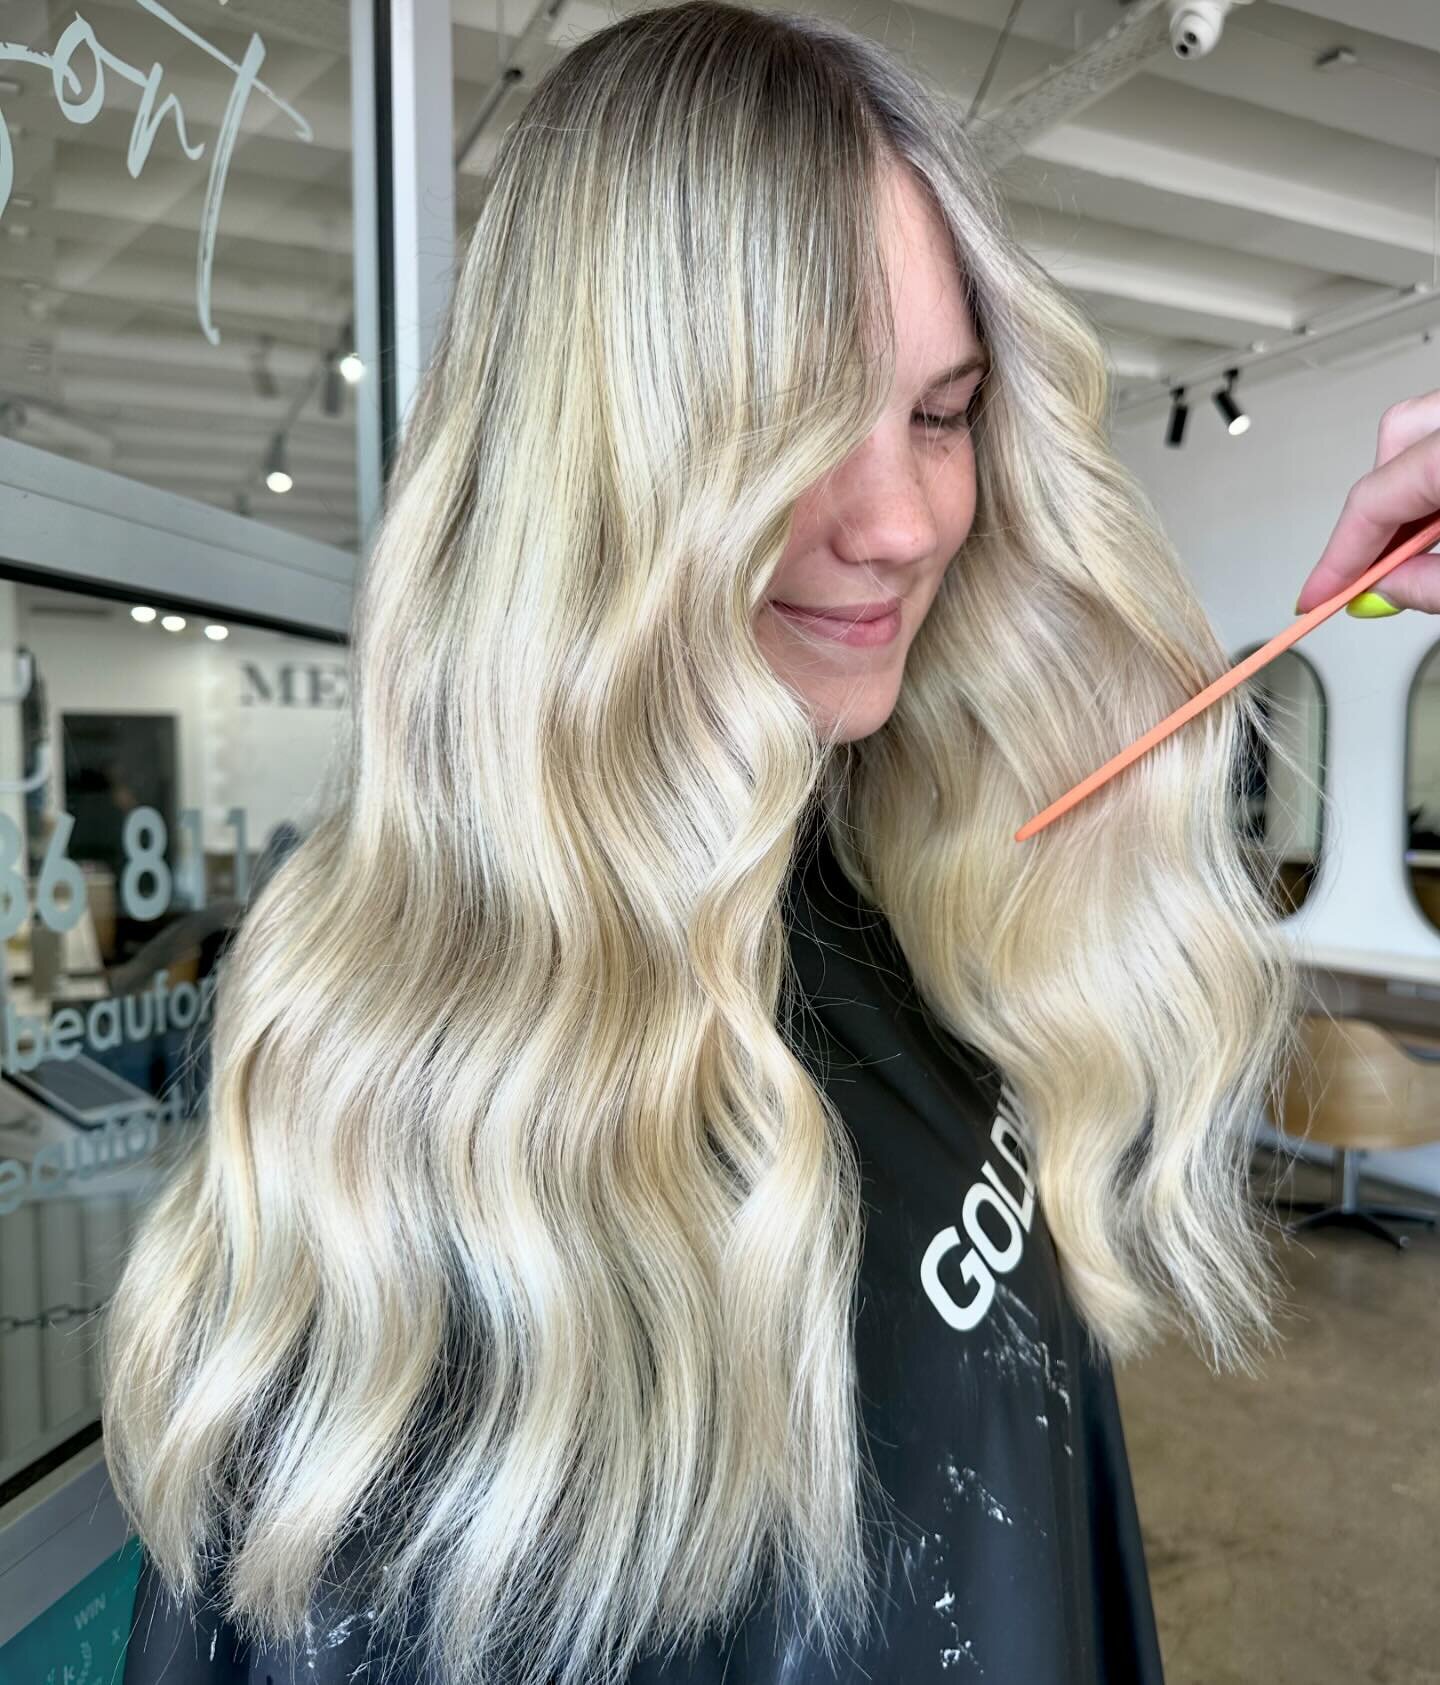 ✨3 TIPS TO KEEP YOUR BLONDE BRIGHT AND SHINY✨ 

- Don&rsquo;t overuse your purple shampoo, it will dull your blonde down 🤭

- Limit heat usage, or make sure you&rsquo;re using a good heat protectant! 🙌🏼
We love heated.defense in @kevin.murphy 

- 